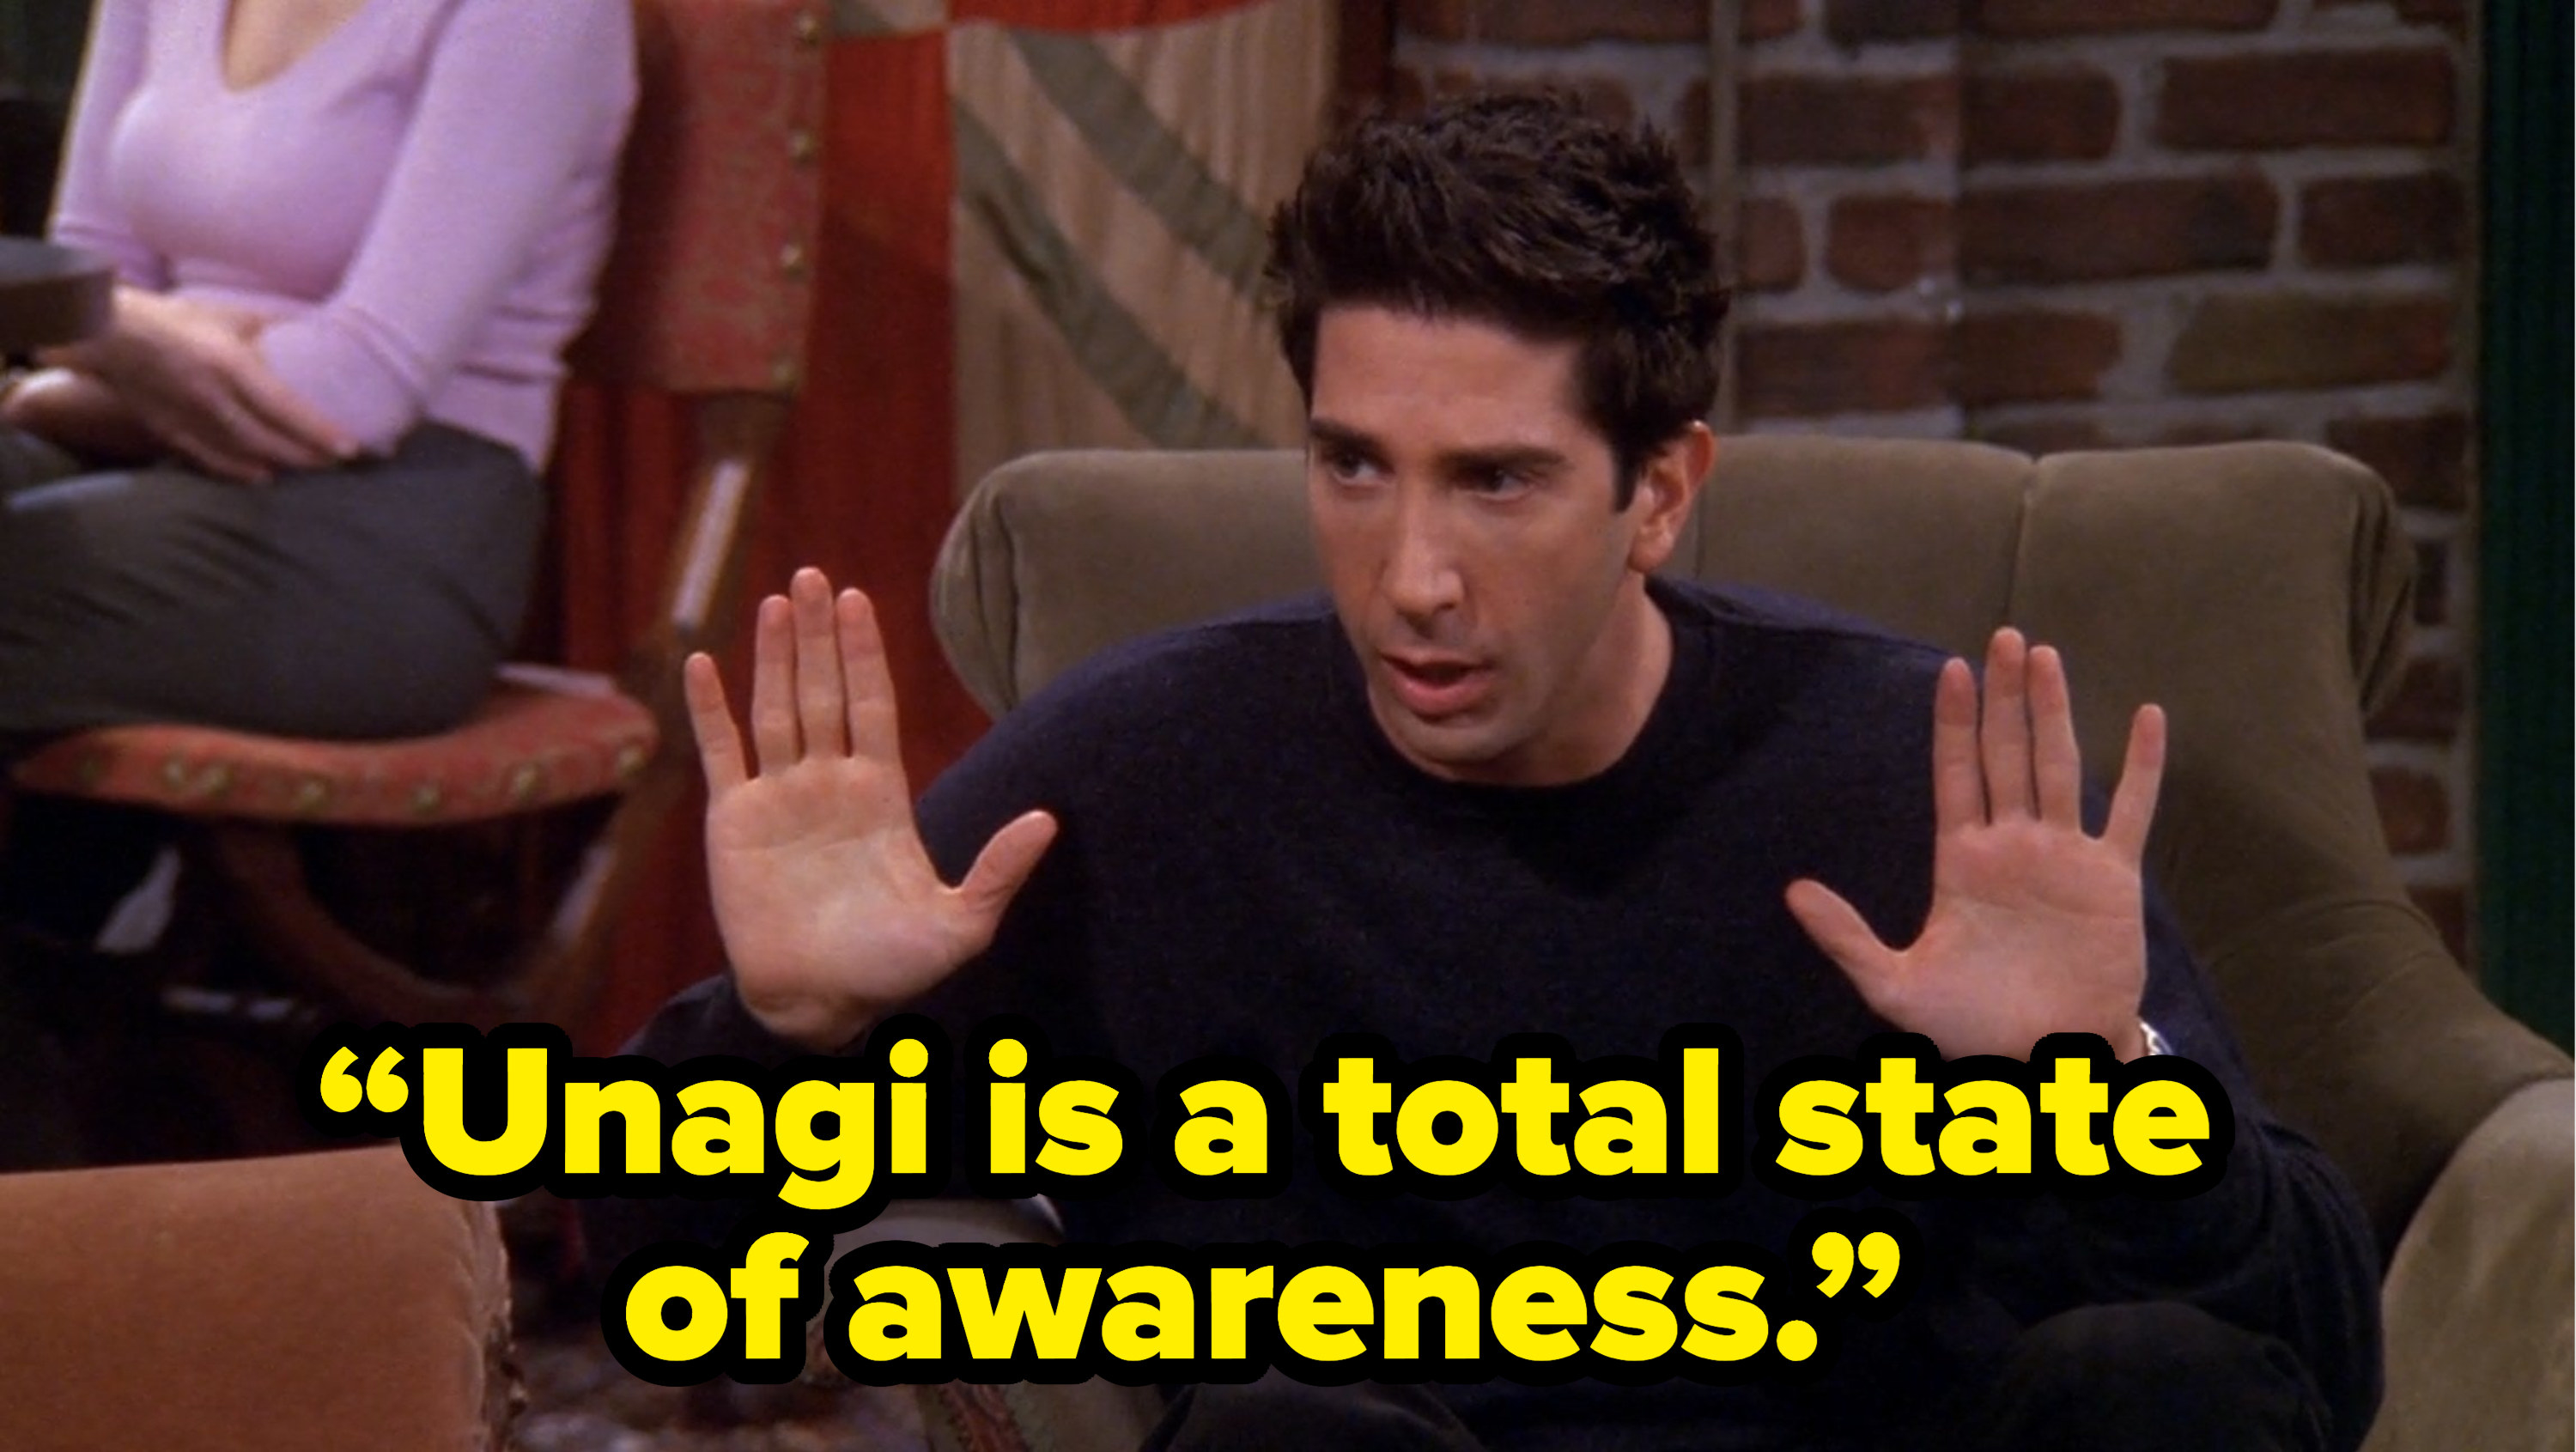 ross saying “Unagi is a total state of awareness.” on friends